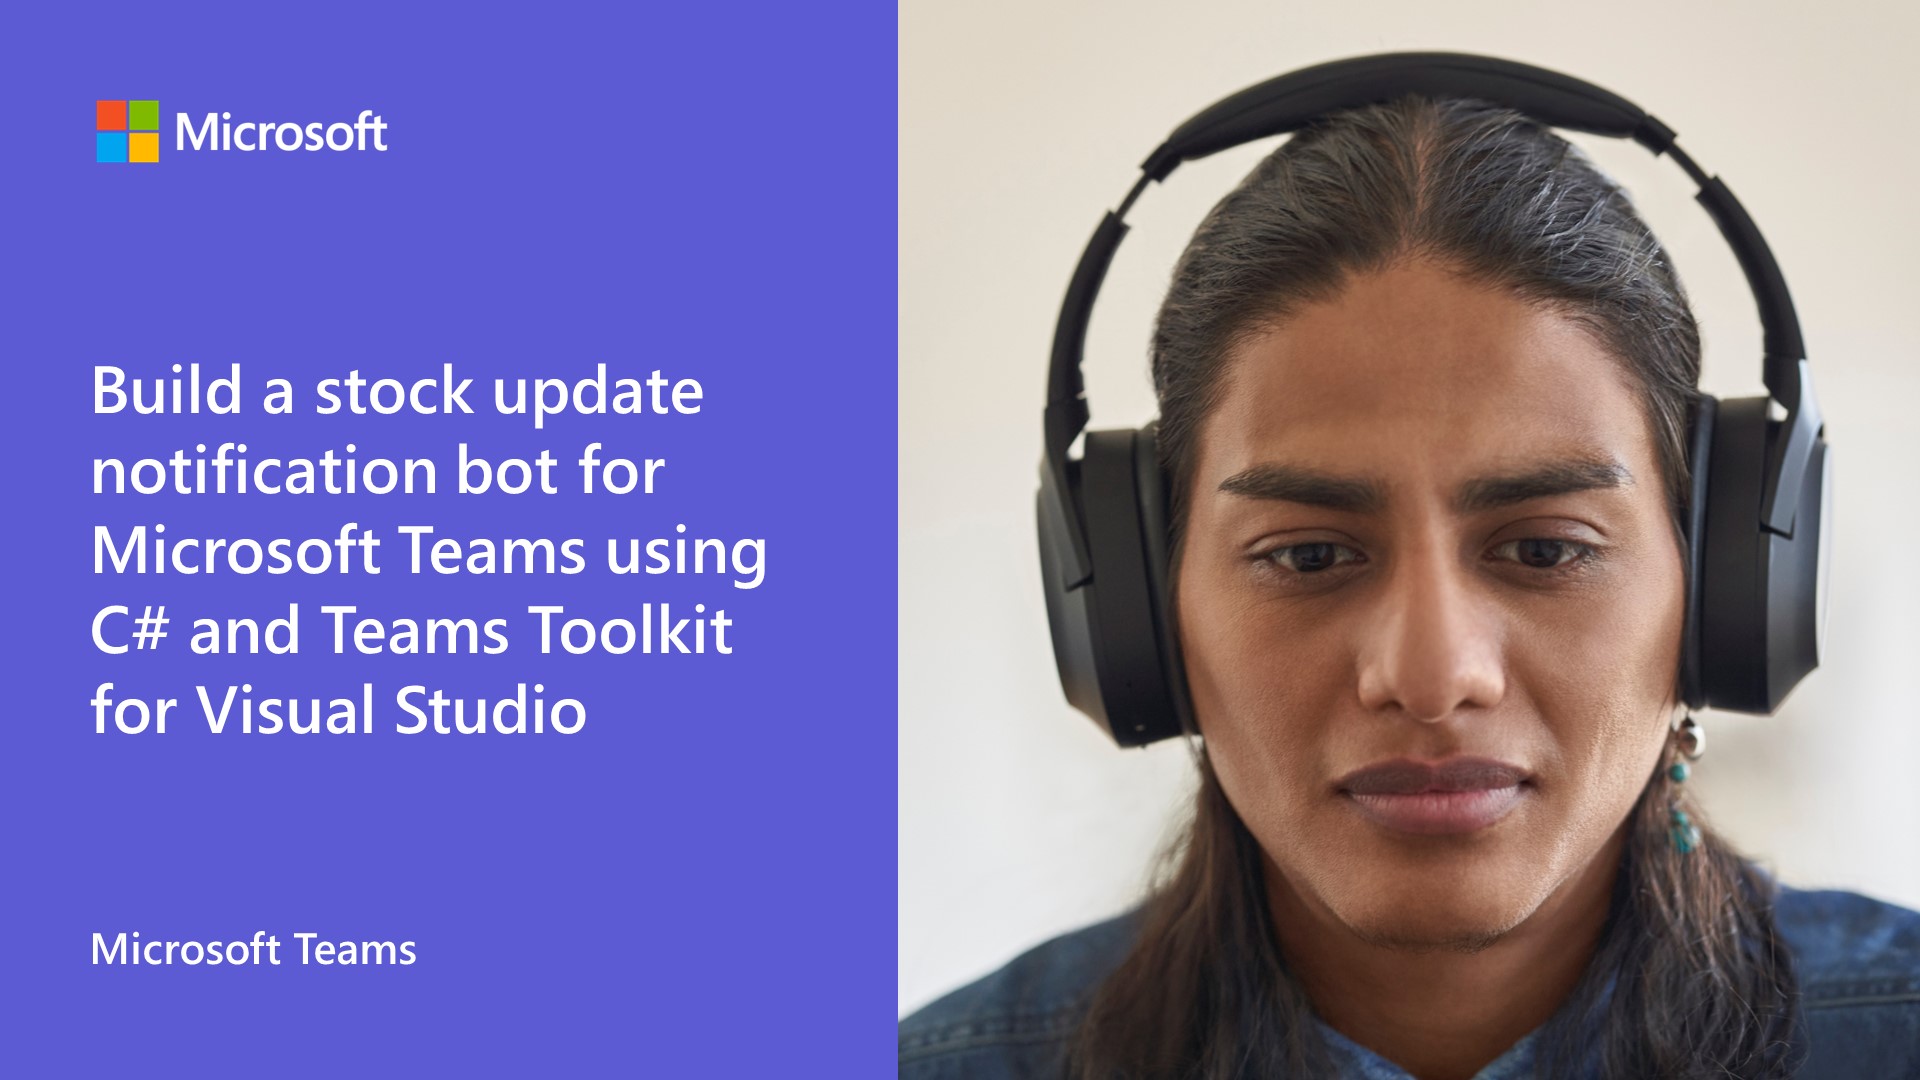 Build a stock update notification bot for Microsoft Teams using C# and Teams Toolkit for Visual Studio